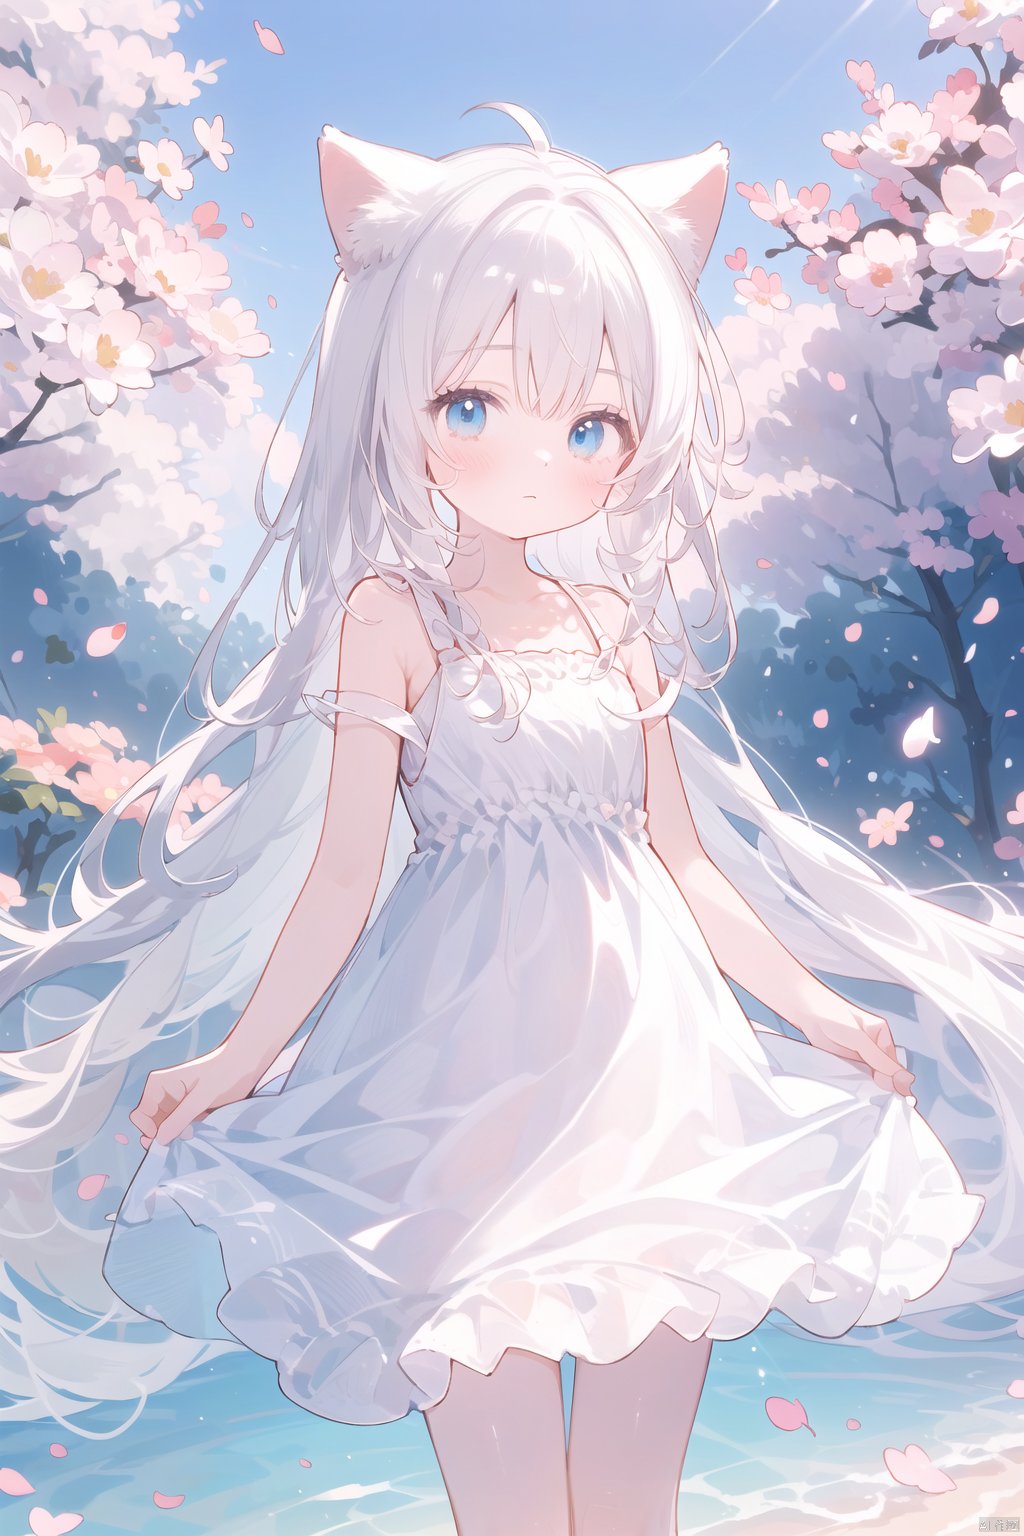 The image features a beautiful anime girl dressed in a flowing white and red dress, standing amidst a flurry of red cherry blossoms. The contrast between her white dress and the red flowers creates a striking visual effect. The lighting in the image is well-balanced, casting a warm glow on the girl and the surrounding flowers. The colors are vibrant and vivid, with the red cherry blossoms standing out against the white sky. The overall style of the image is dreamy and romantic, perfect for a piece of anime artwork. The quality of the image is excellent, with clear details and sharp focus. The girl's dress and the flowers are well-defined, and the background is evenly lit, without any harsh shadows or glare. From a technical standpoint, the image is well-composed, with the girl standing in the center of the frame, surrounded by the blossoms. The use of negative space in the background helps to draw the viewer's attention to the girl and the flowers. The cherry blossoms, often associated with transience and beauty, further reinforce this theme. The girl, lost in her thoughts, seems to be contemplating the fleeting nature of beauty and the passage of time. Overall, this is an impressive image that showcases the photographer's skill in capturing the essence of a scene, as well as their ability to create a compelling narrative through their art.catgirl,loli,catgirl,white hair,blue eyes,